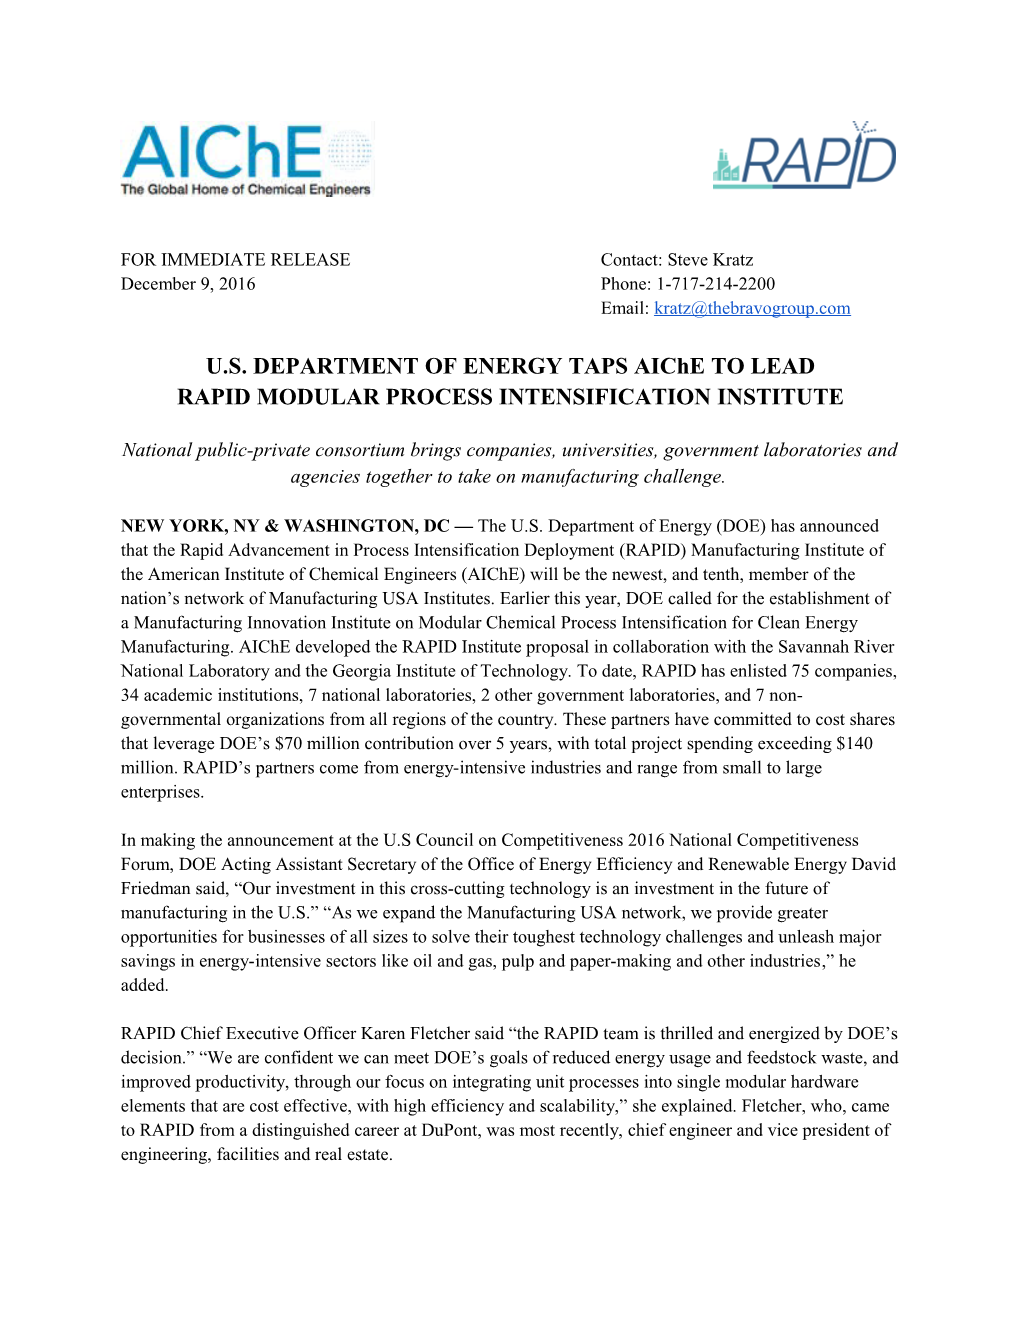 U.S. DEPARTMENT of ENERGY TAPS Aiche to LEAD